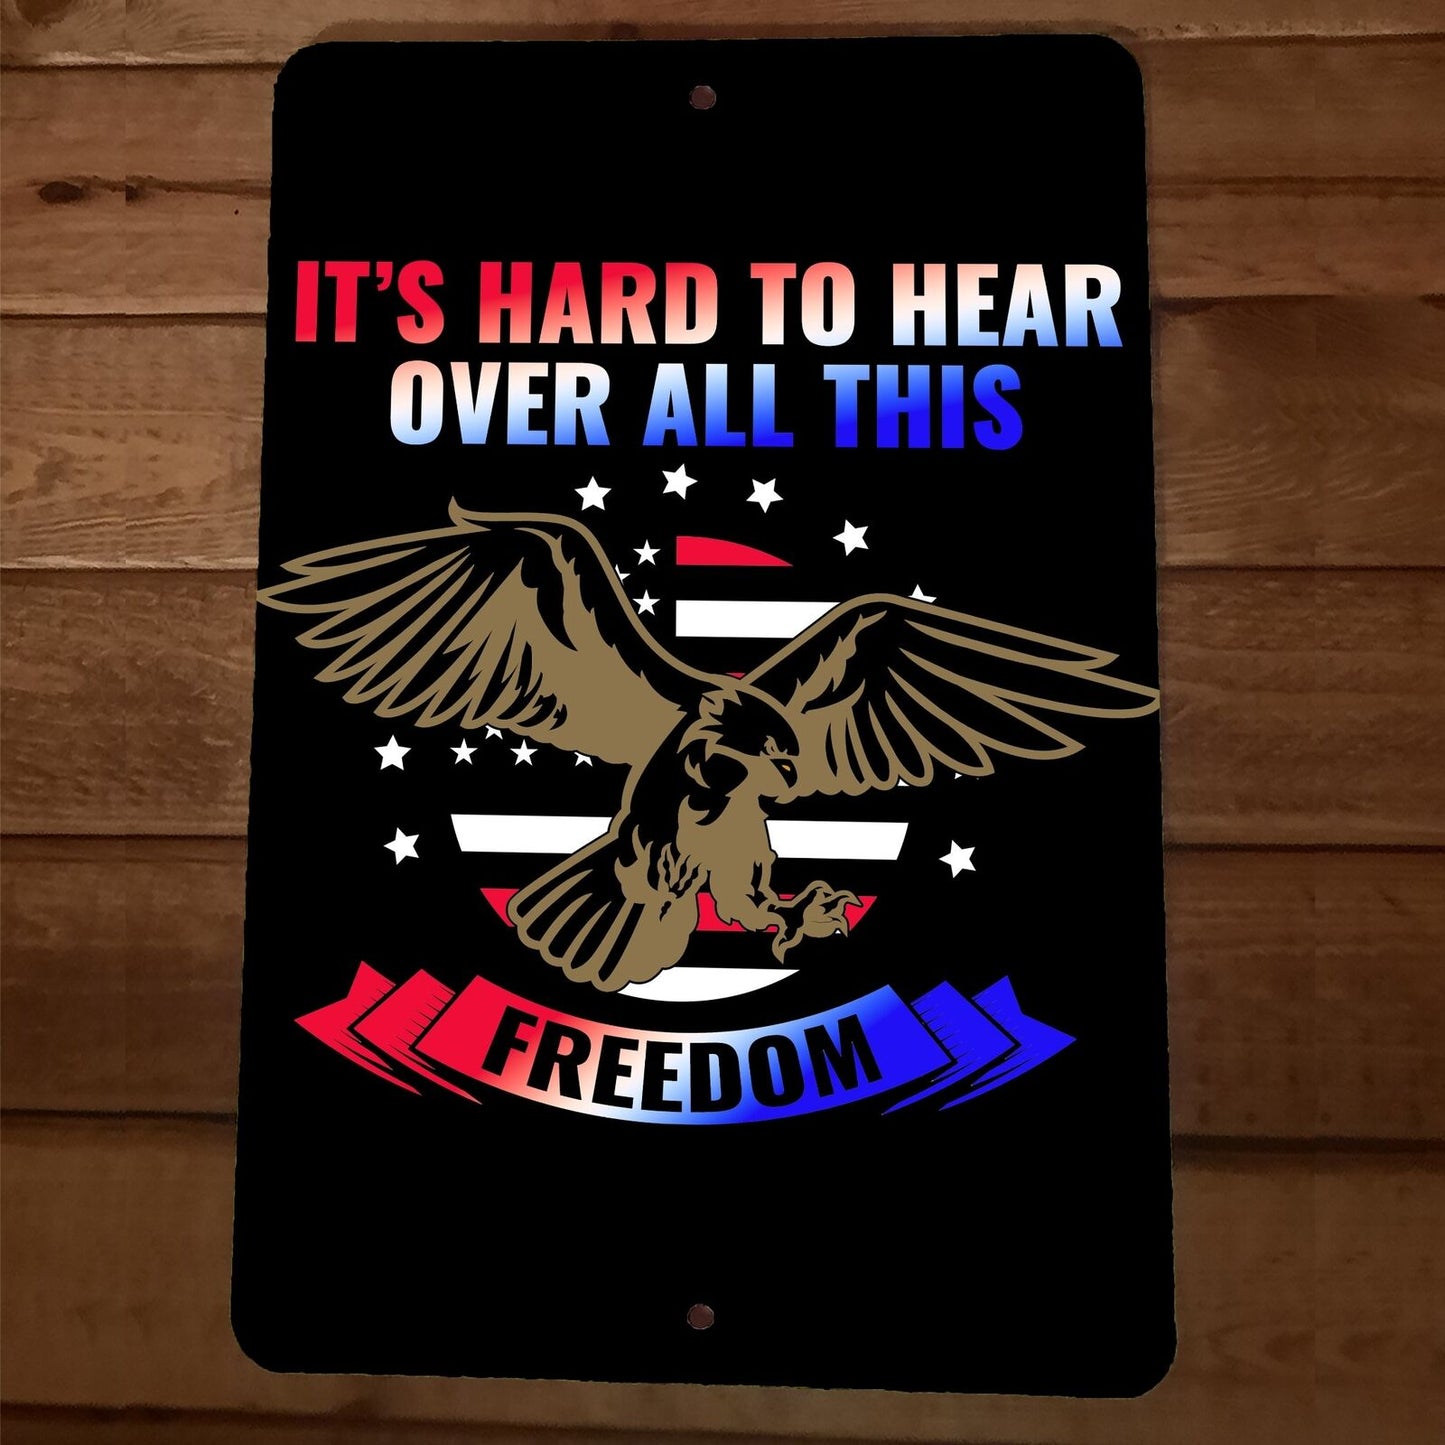 Hard to Hear Over All This Freedom America 8x12 Metal Wall Sign Poster July 4th